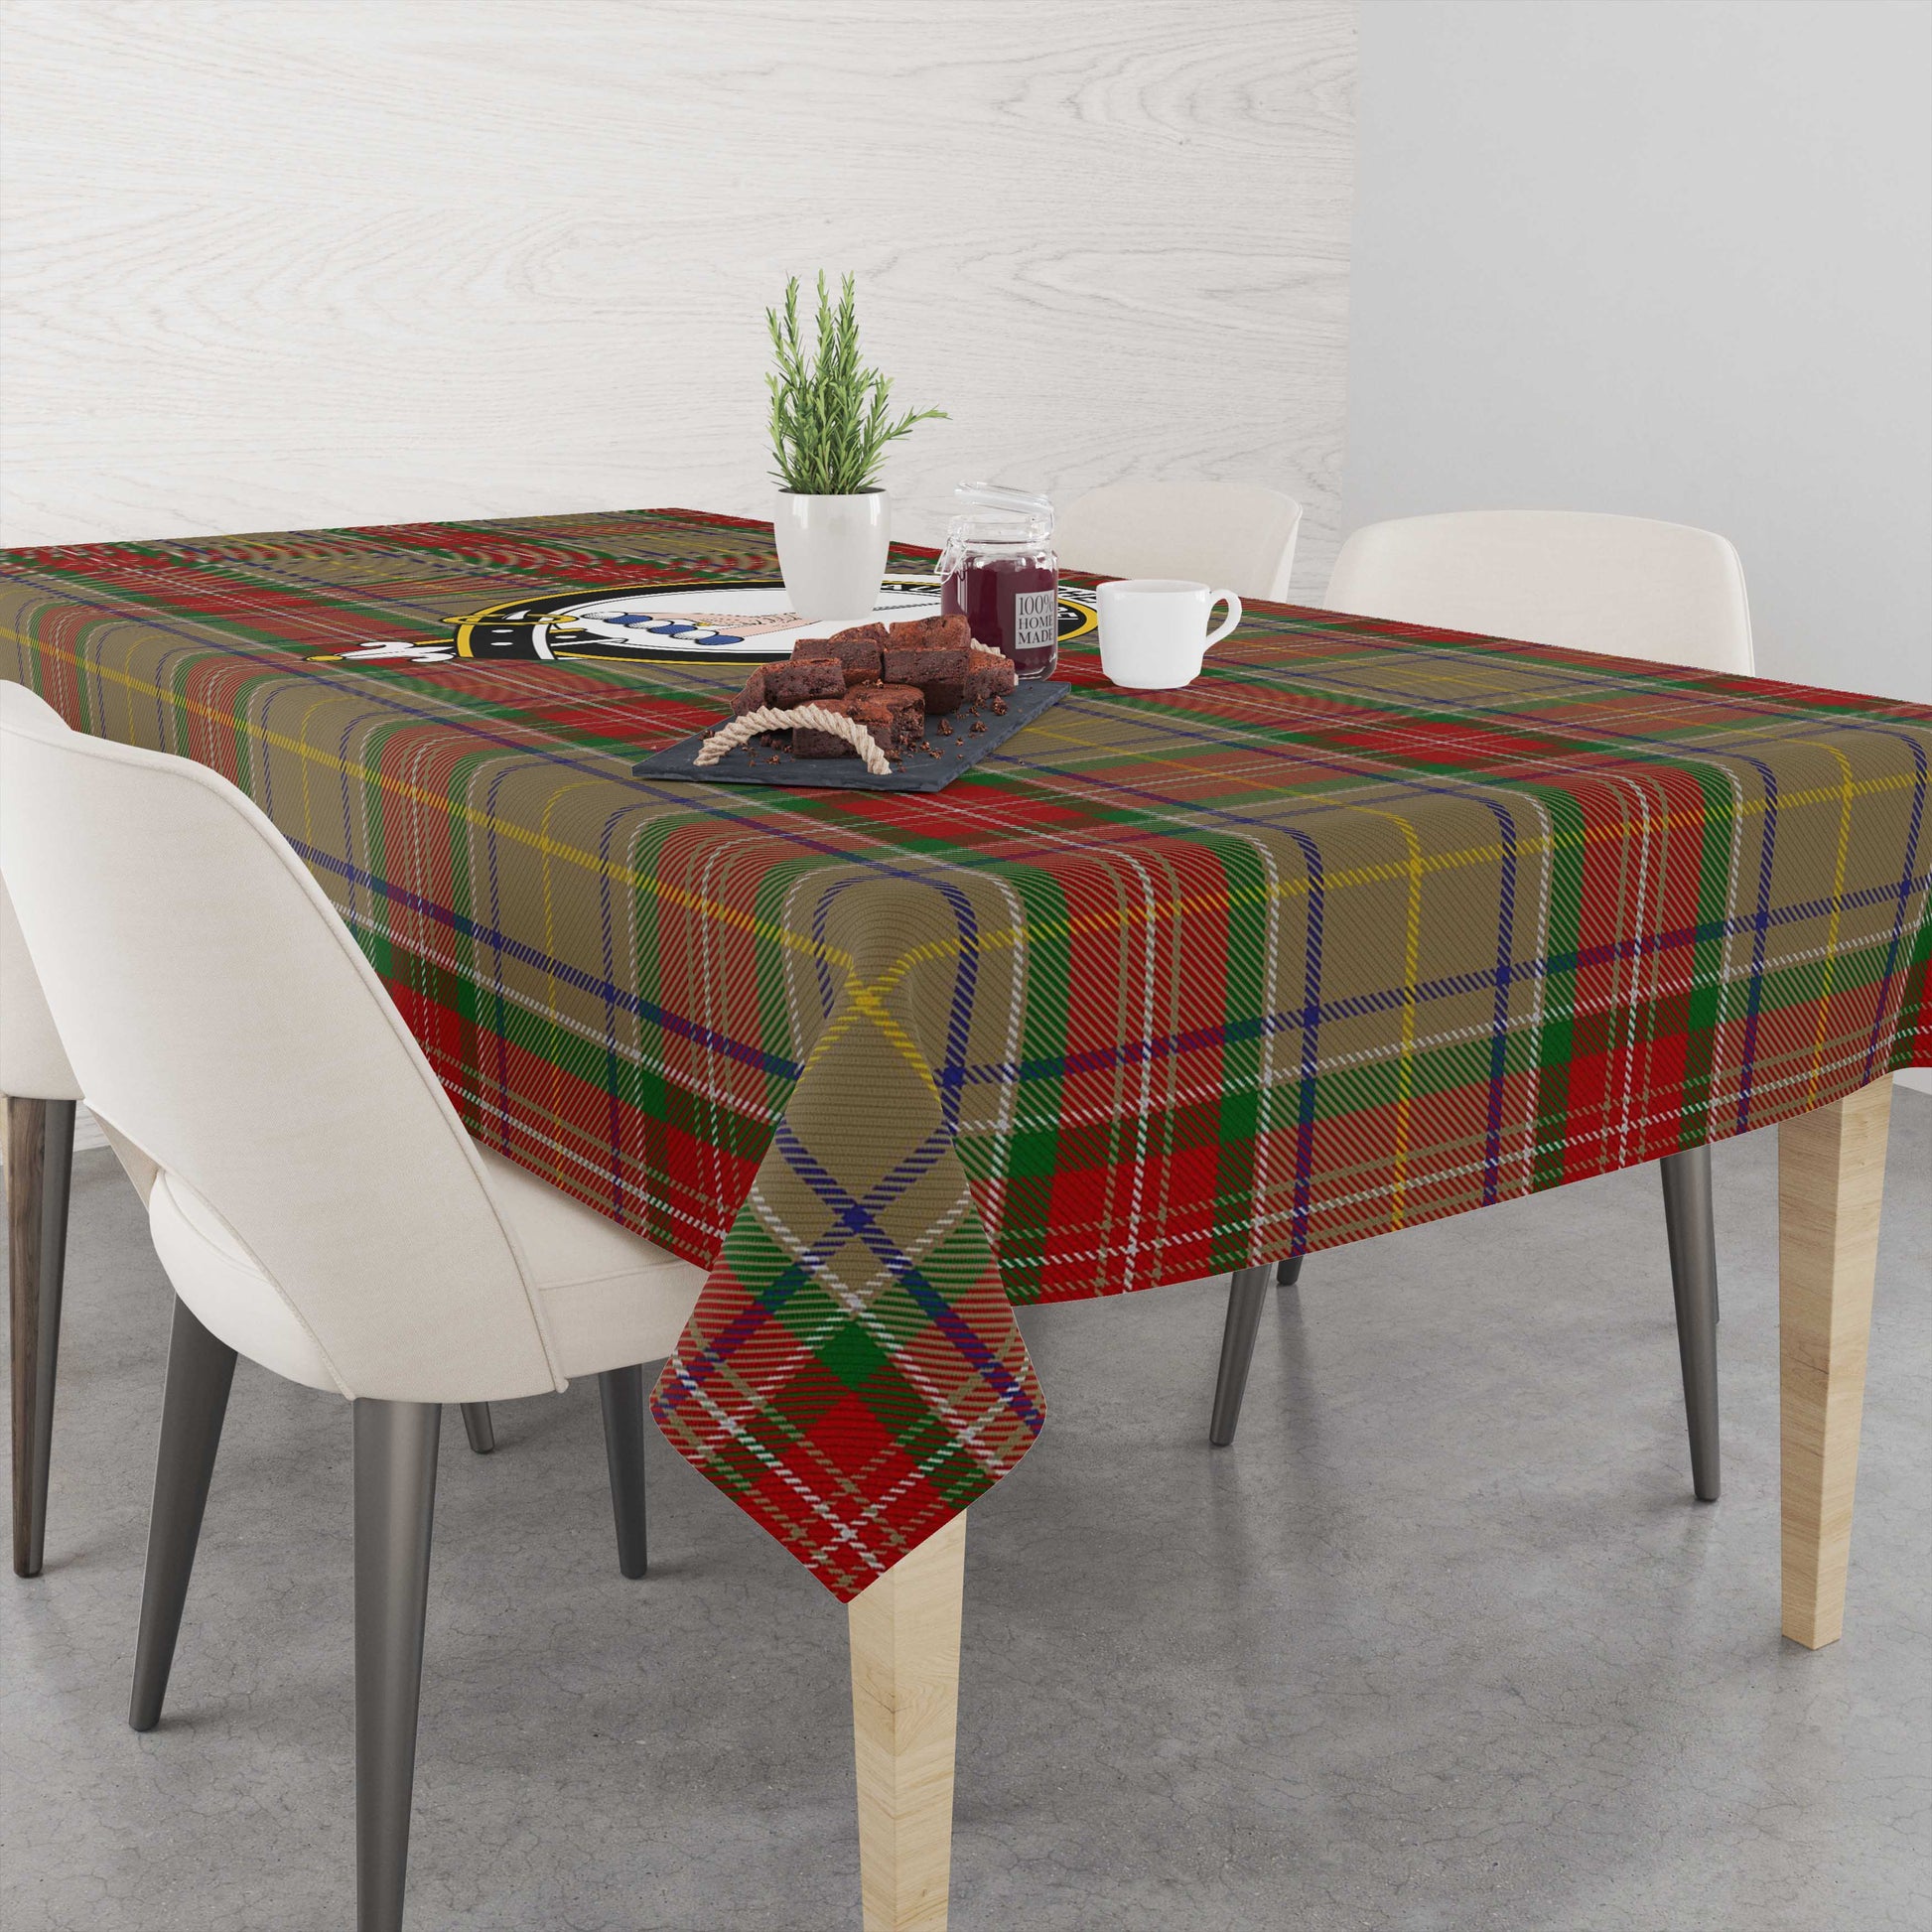 muirhead-old-tatan-tablecloth-with-family-crest